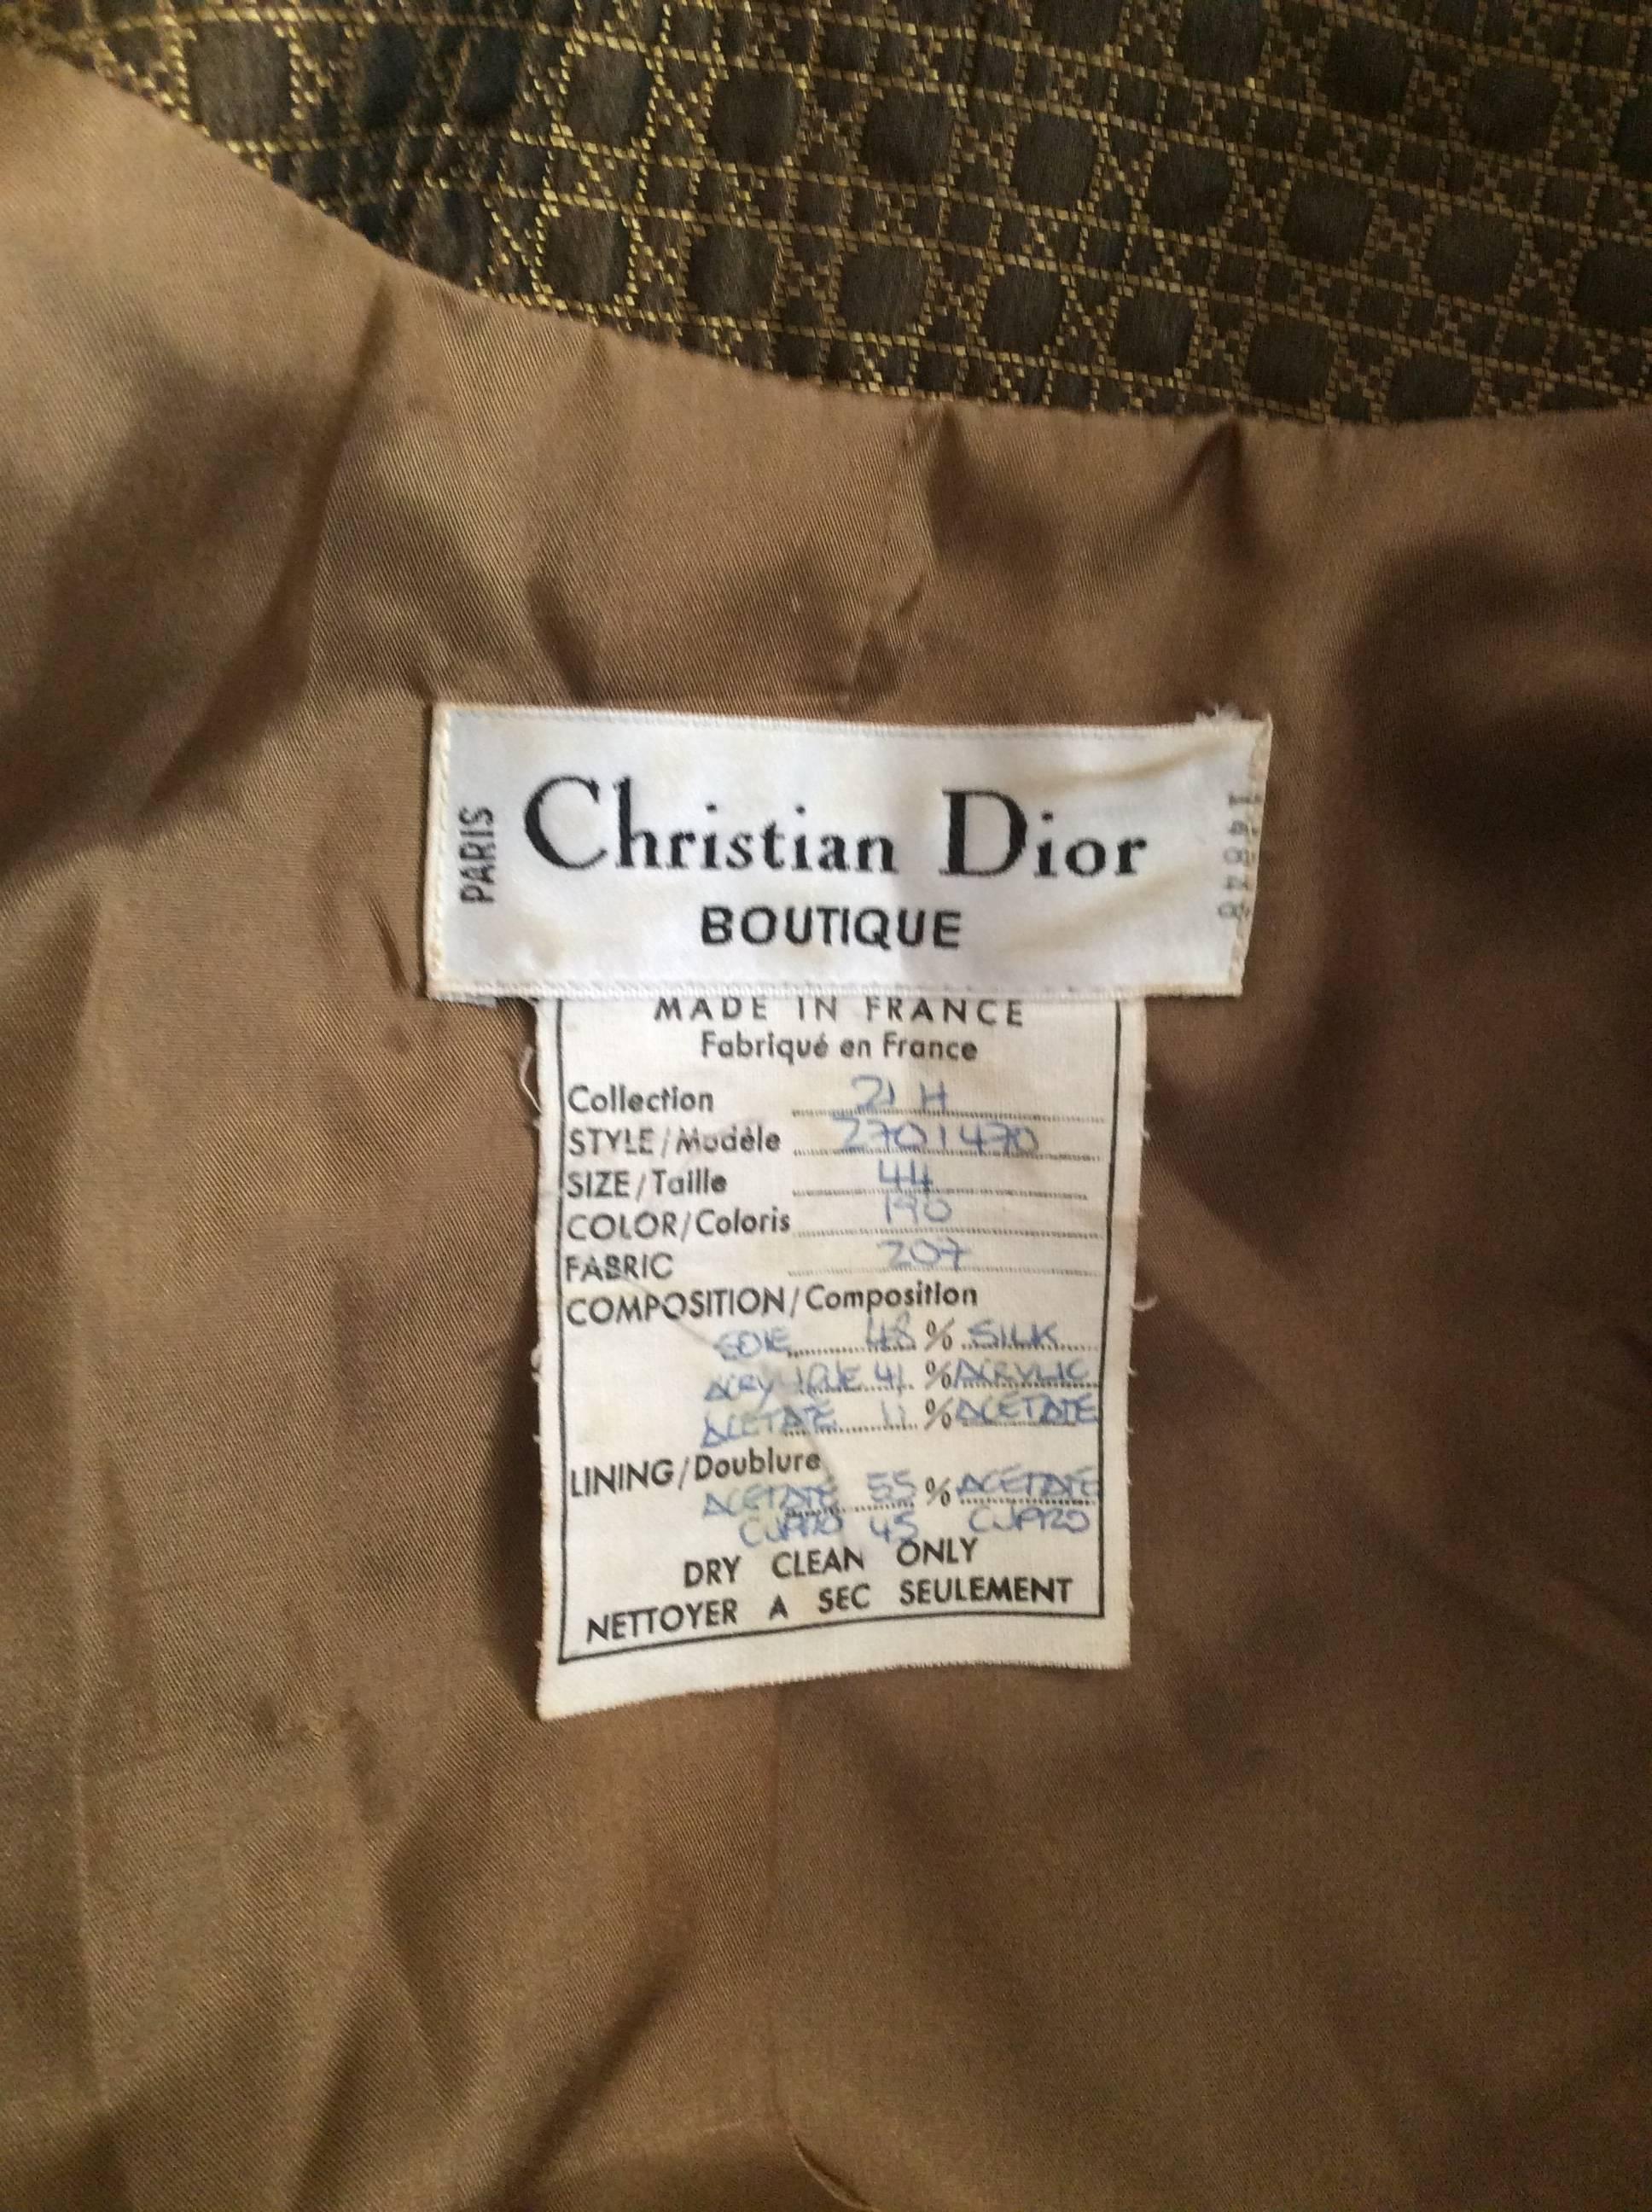 Christian Dior Boutique 2 Piece Silk Jacket with Matching Skirt 4